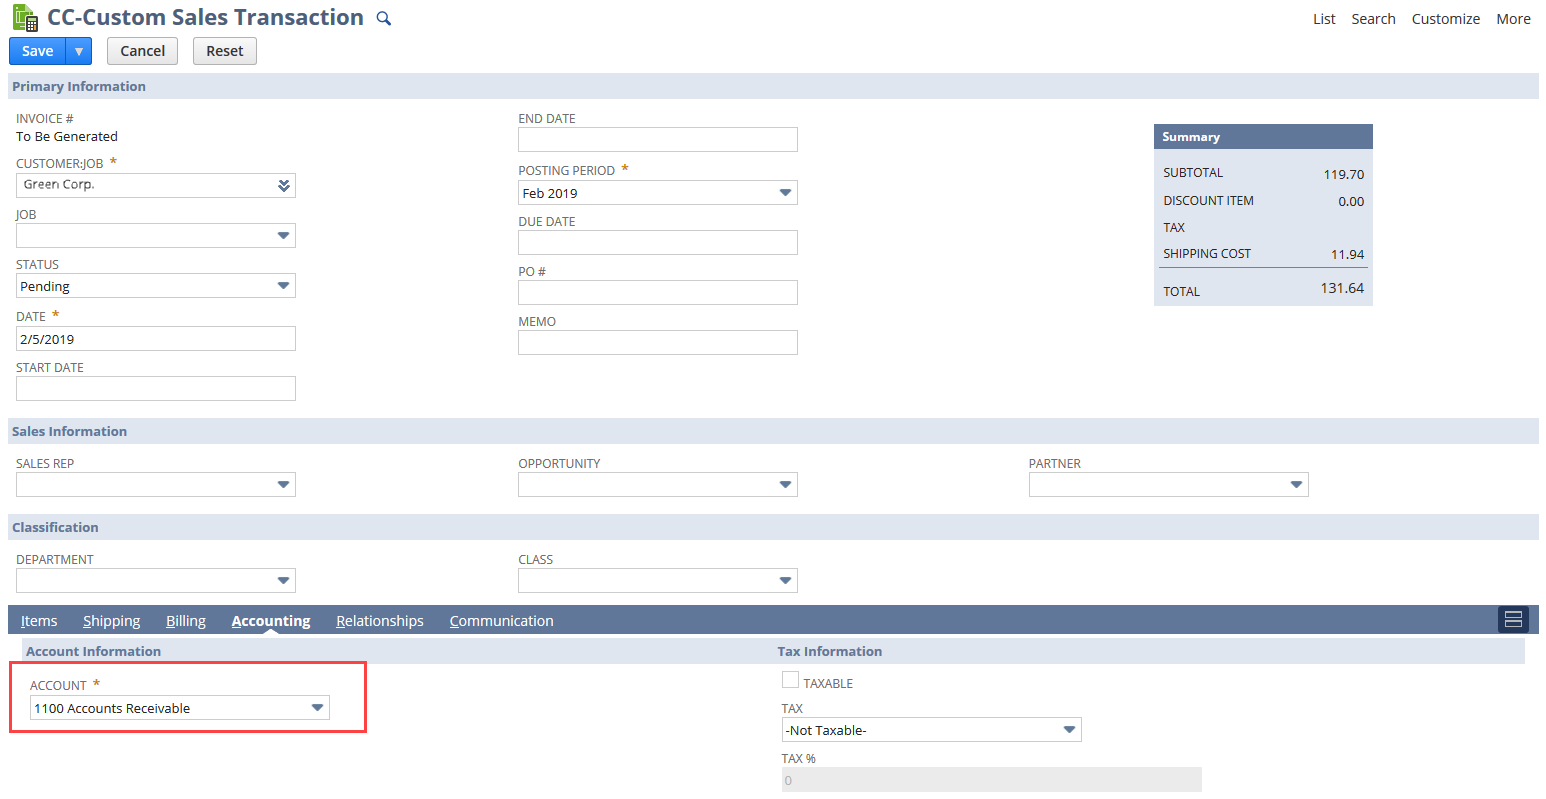 Sample Sales custom transaction highlighting the Account field on the Accounting subtab.